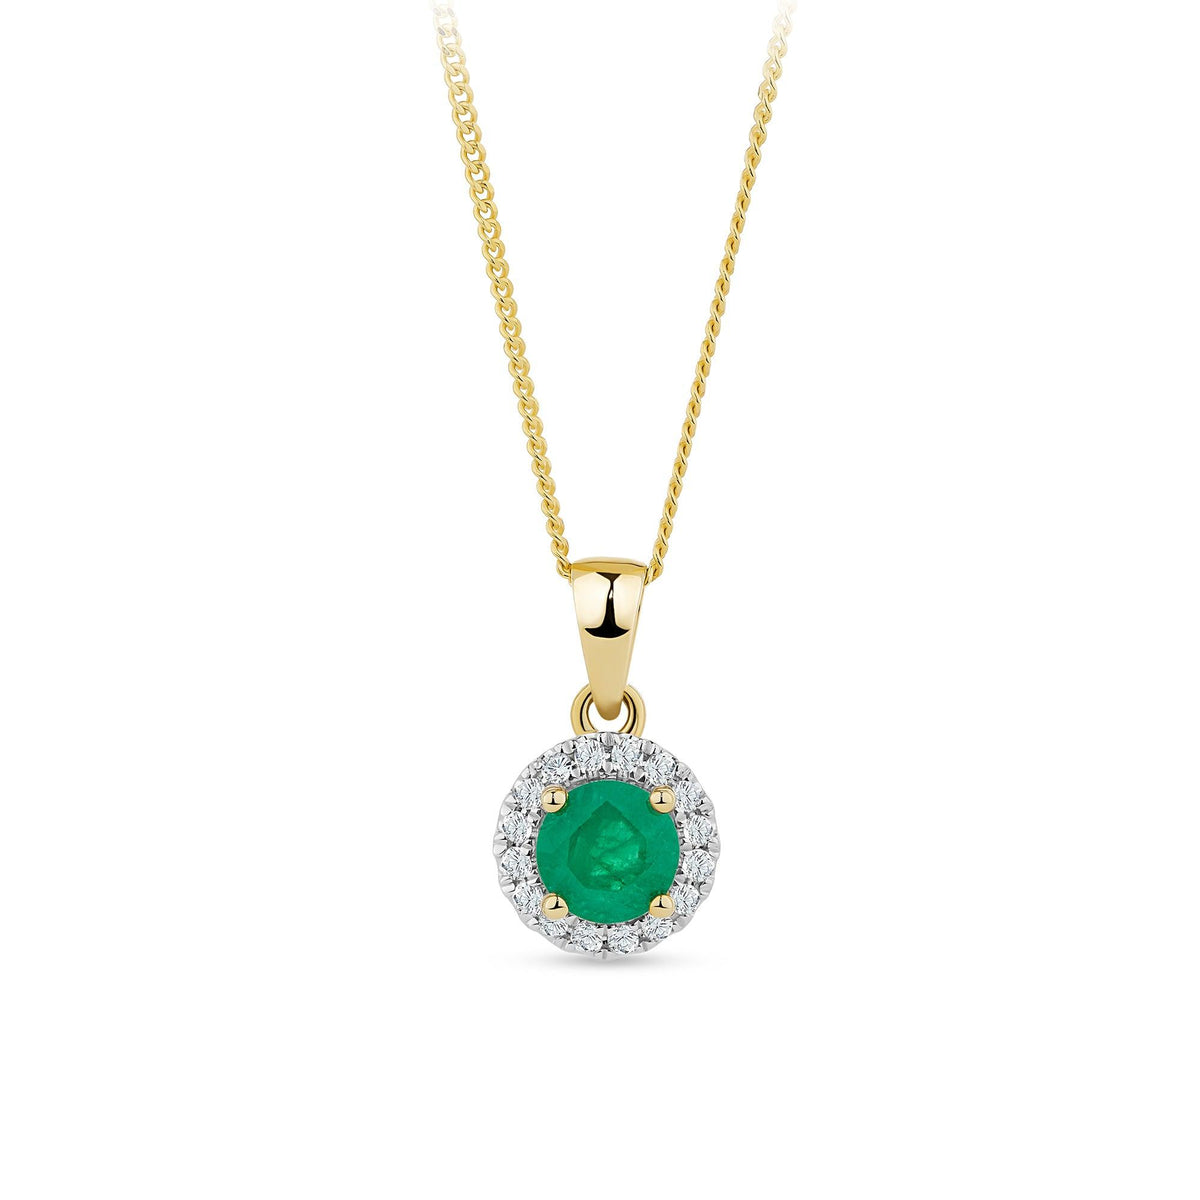 Emerald & 0.11ct TDW Diamond Halo Pendant Necklace in 9ct Yellow Gold - Wallace Bishop